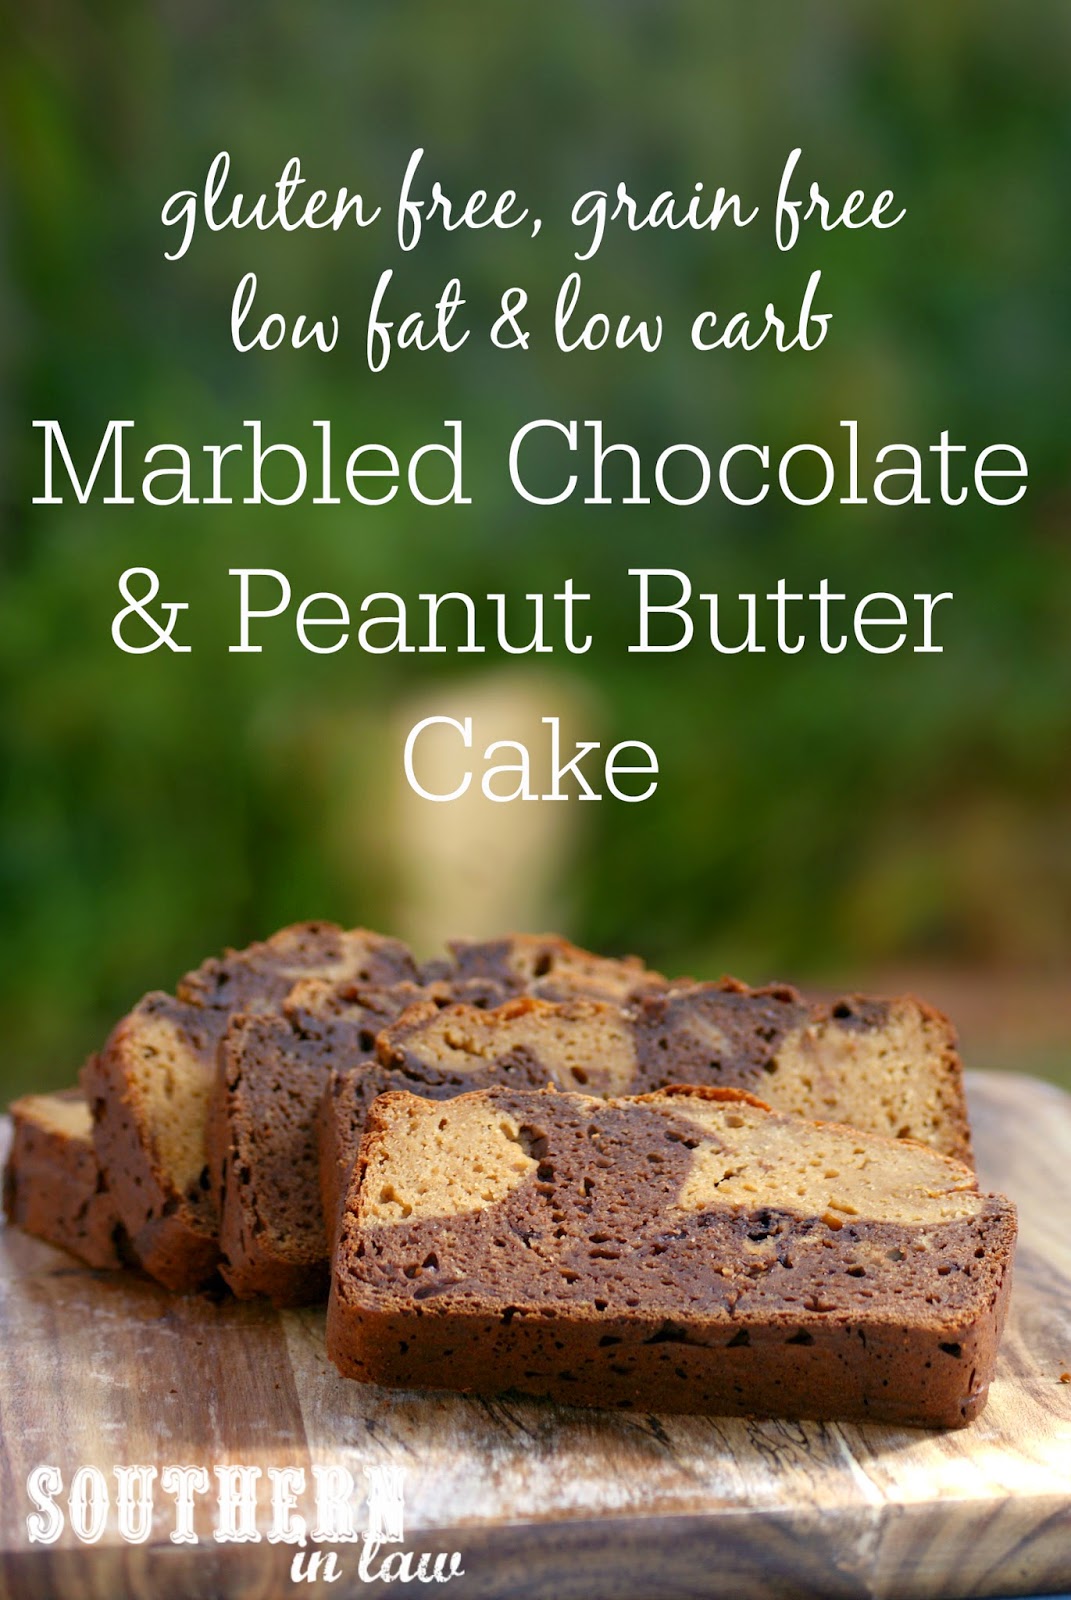 Healthy, Low Carb Marbled Chocolate and Peanut Butter Cake - low fat, gluten free, low carb, high protein, grain free, refined sugar free